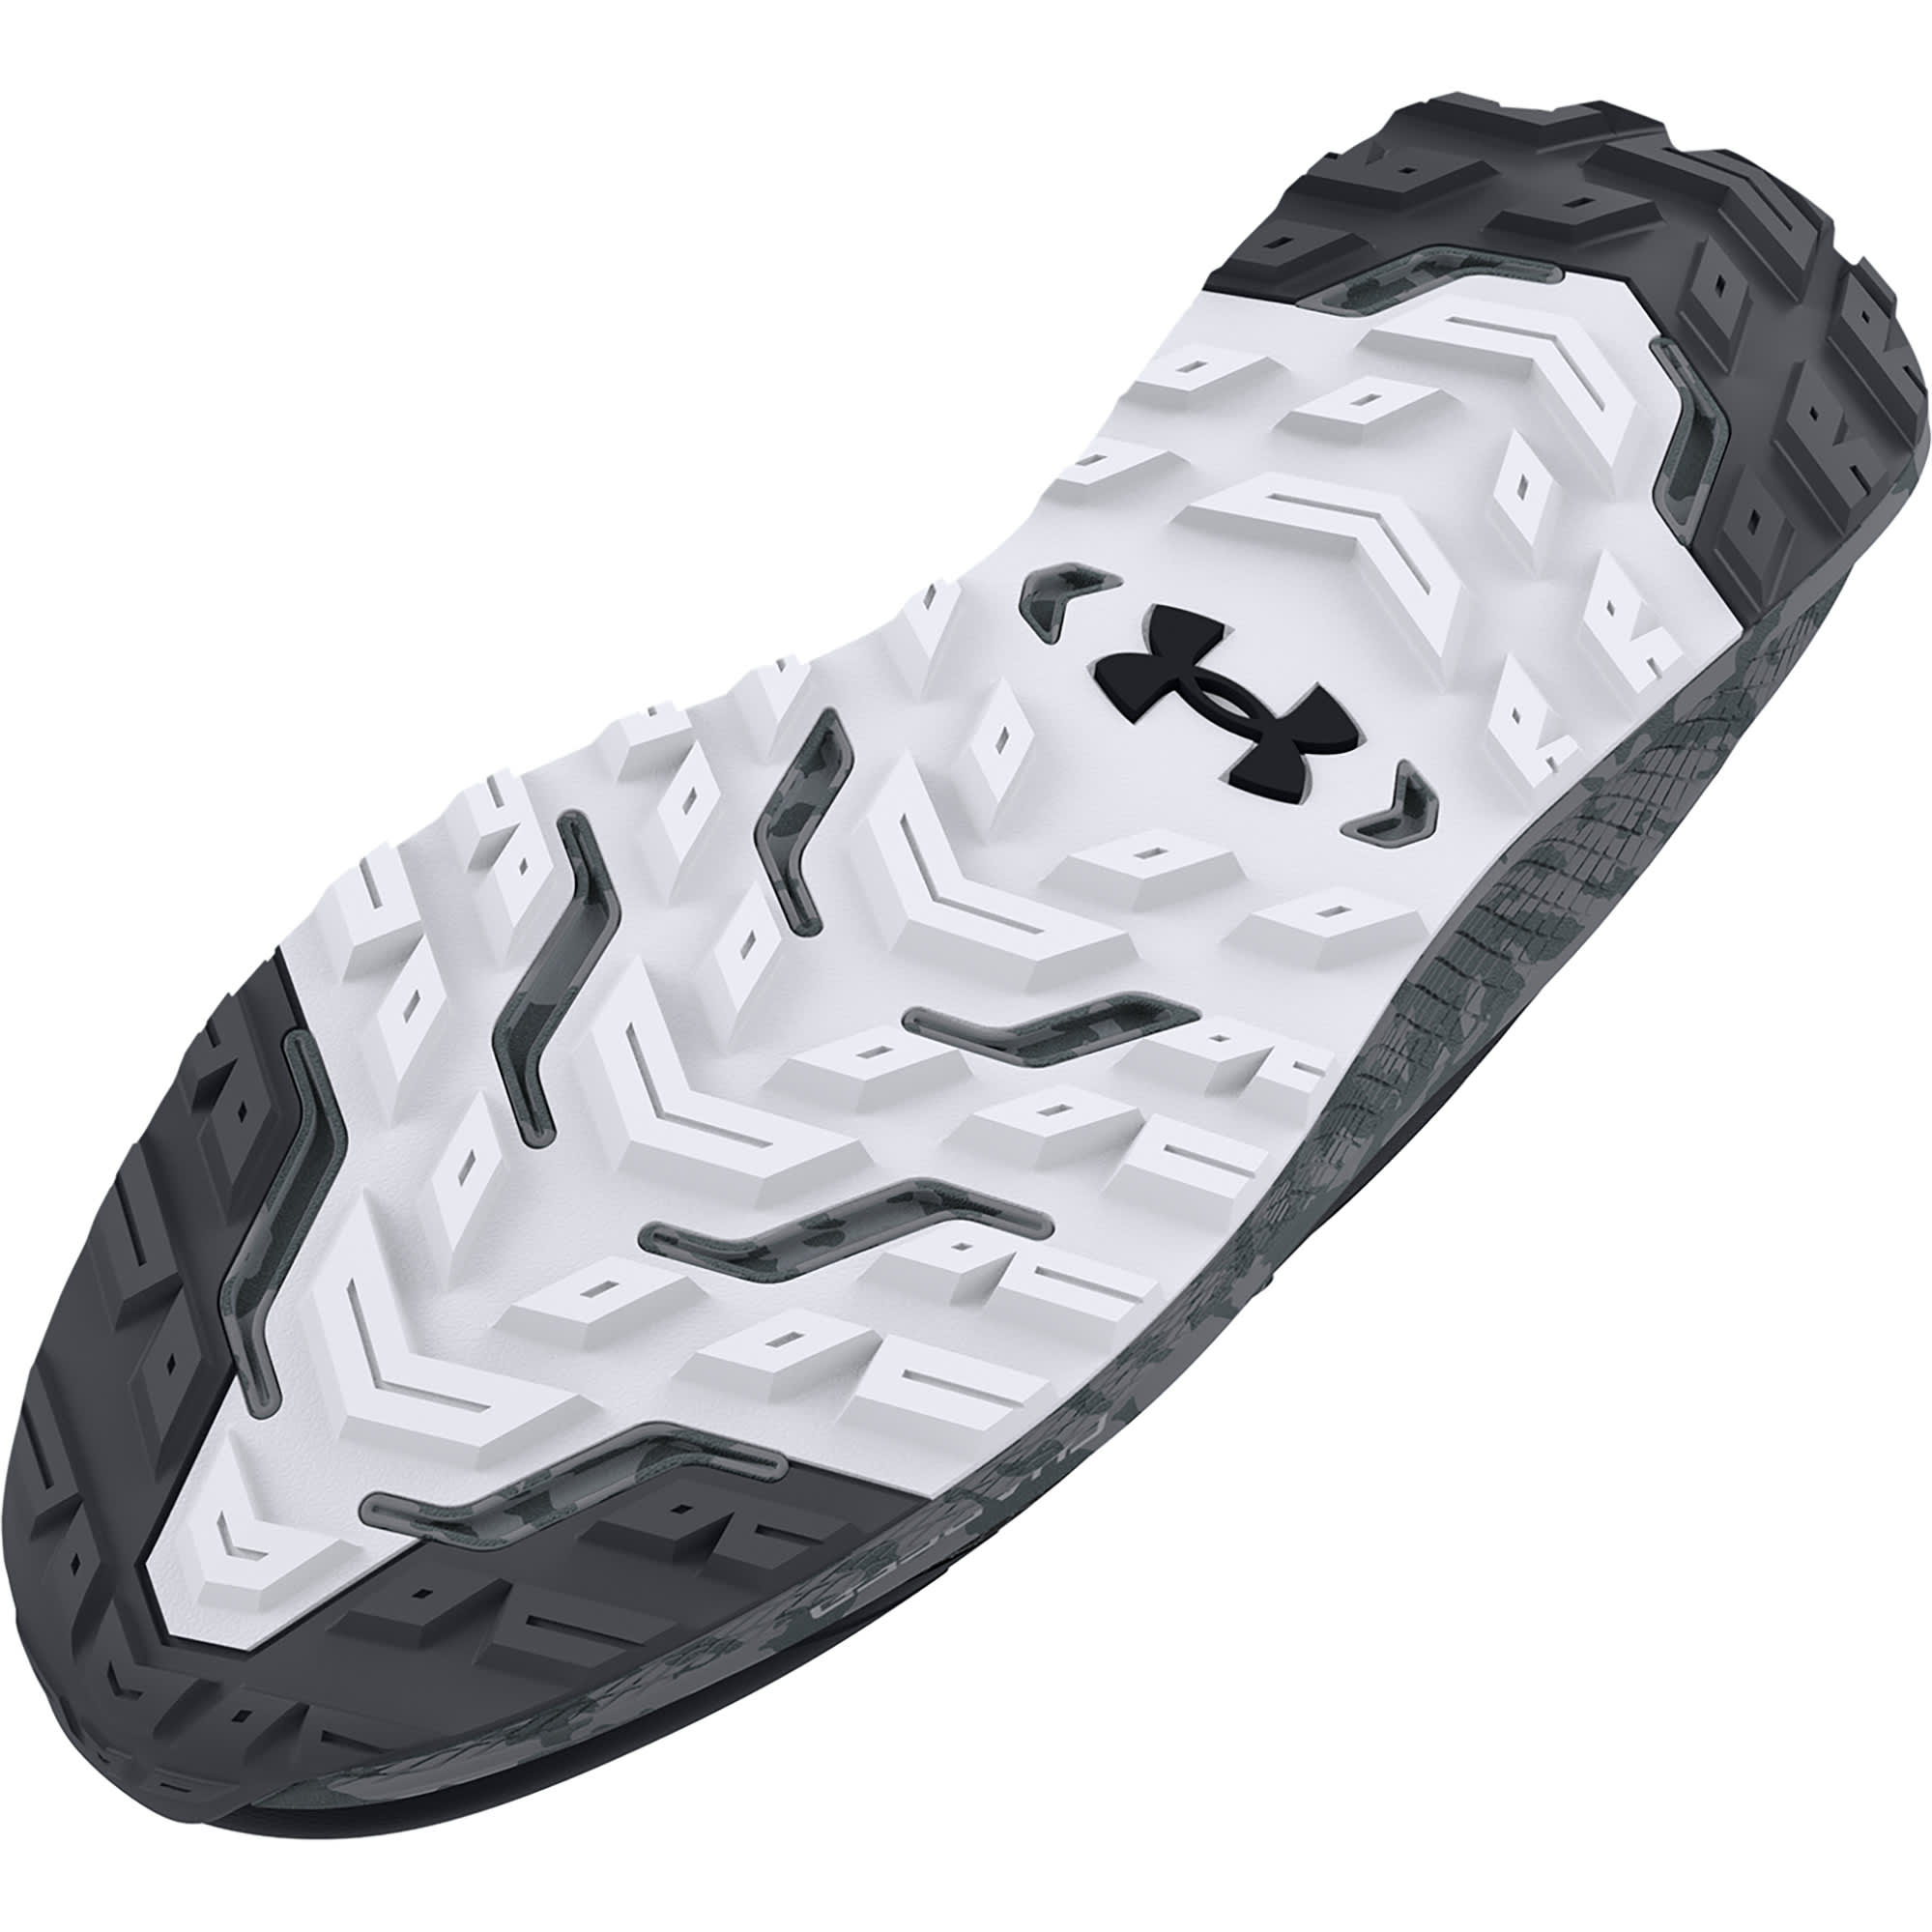 Under Armor Charged Bandit Trail 2 Running Shoes - 3024186-104